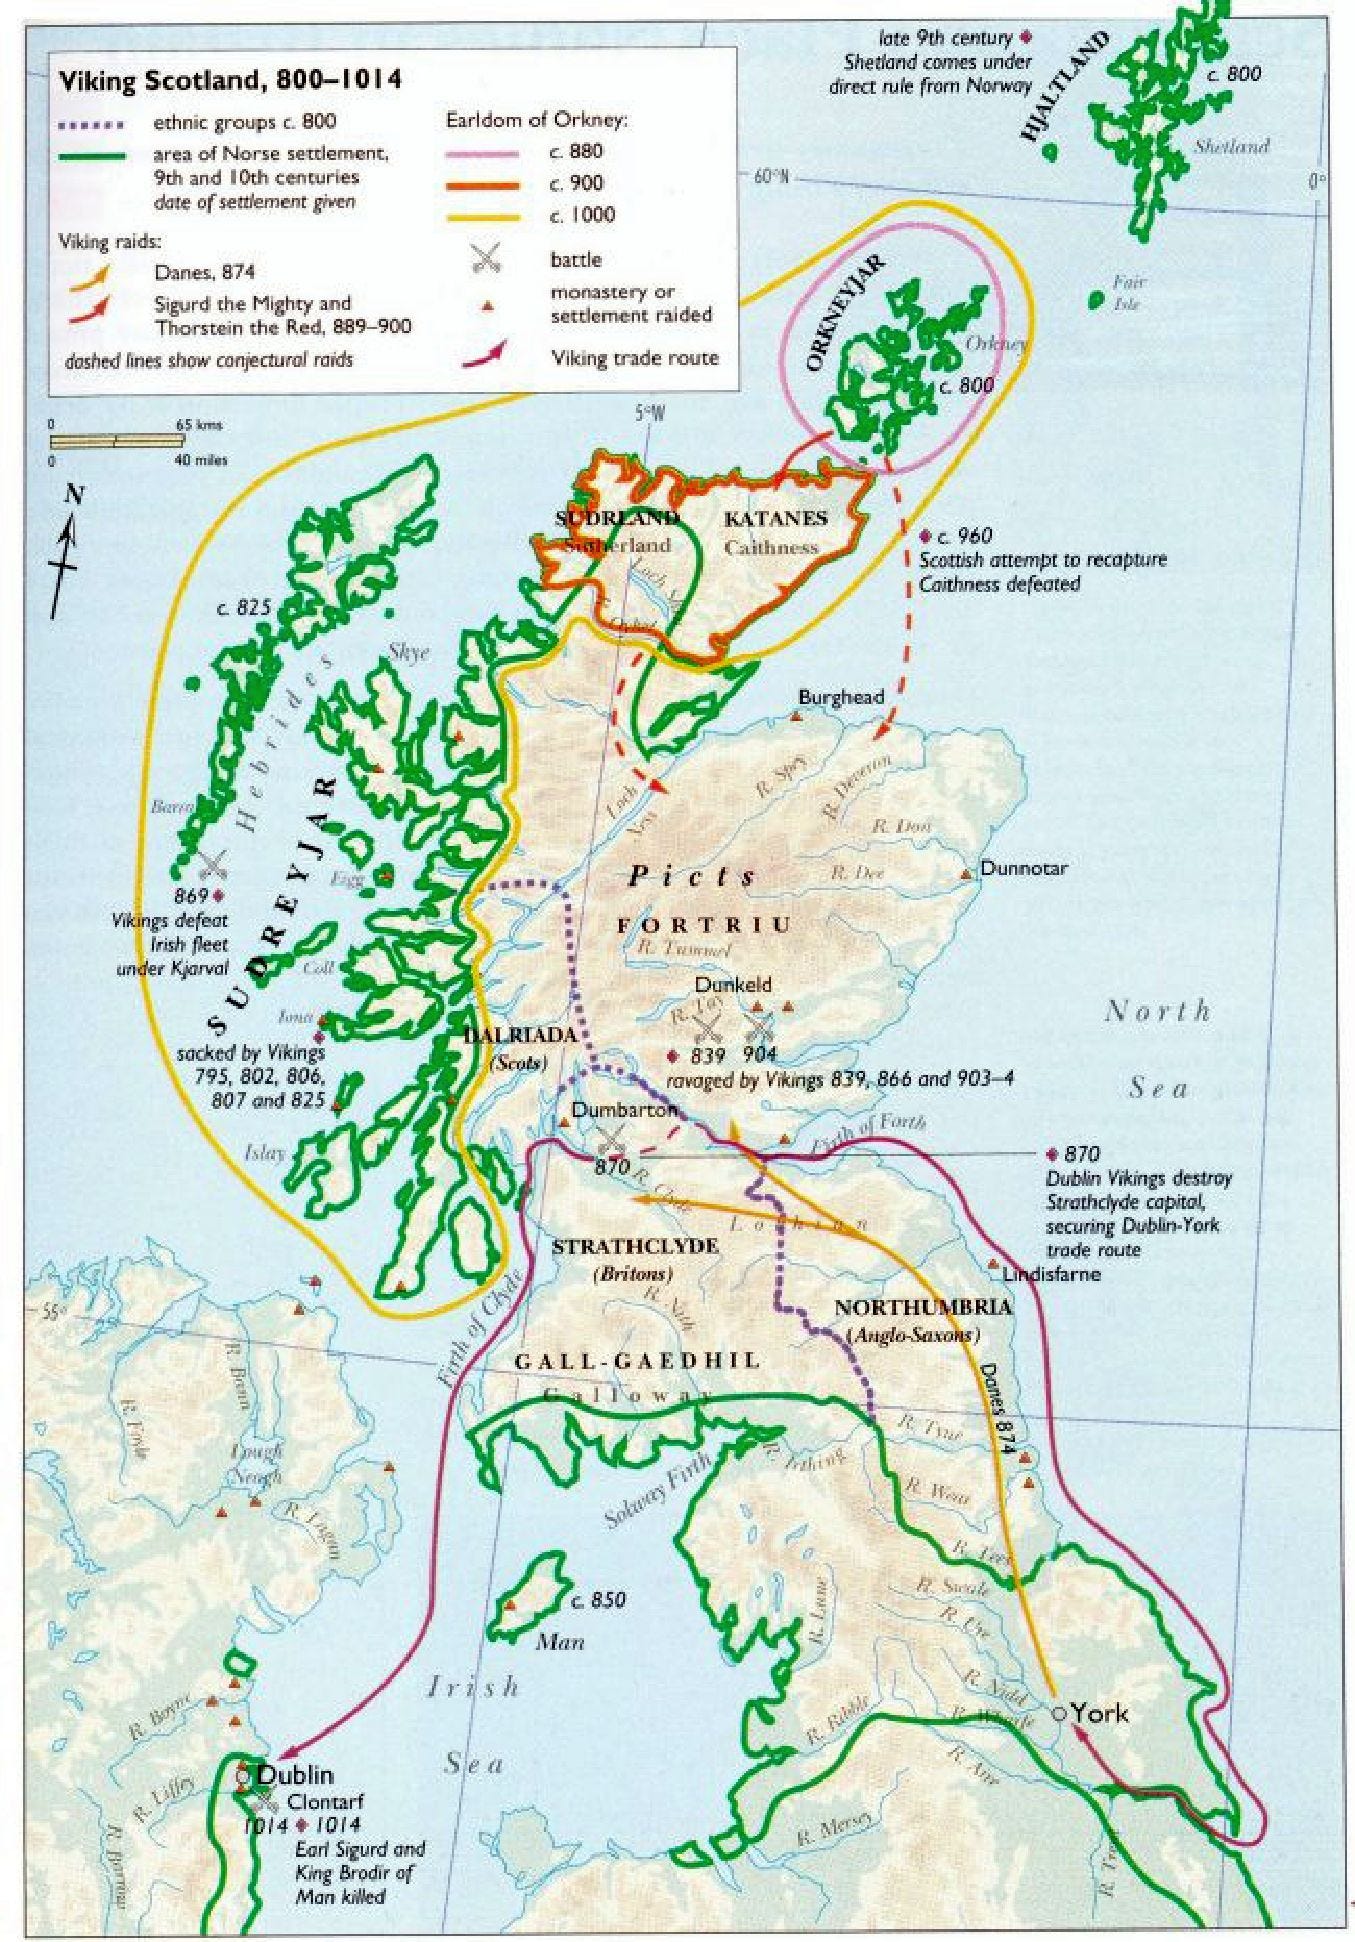 Map from History Scotland showing the various ethnic groupings and conflicts in the viking age, from 800 to 1014.